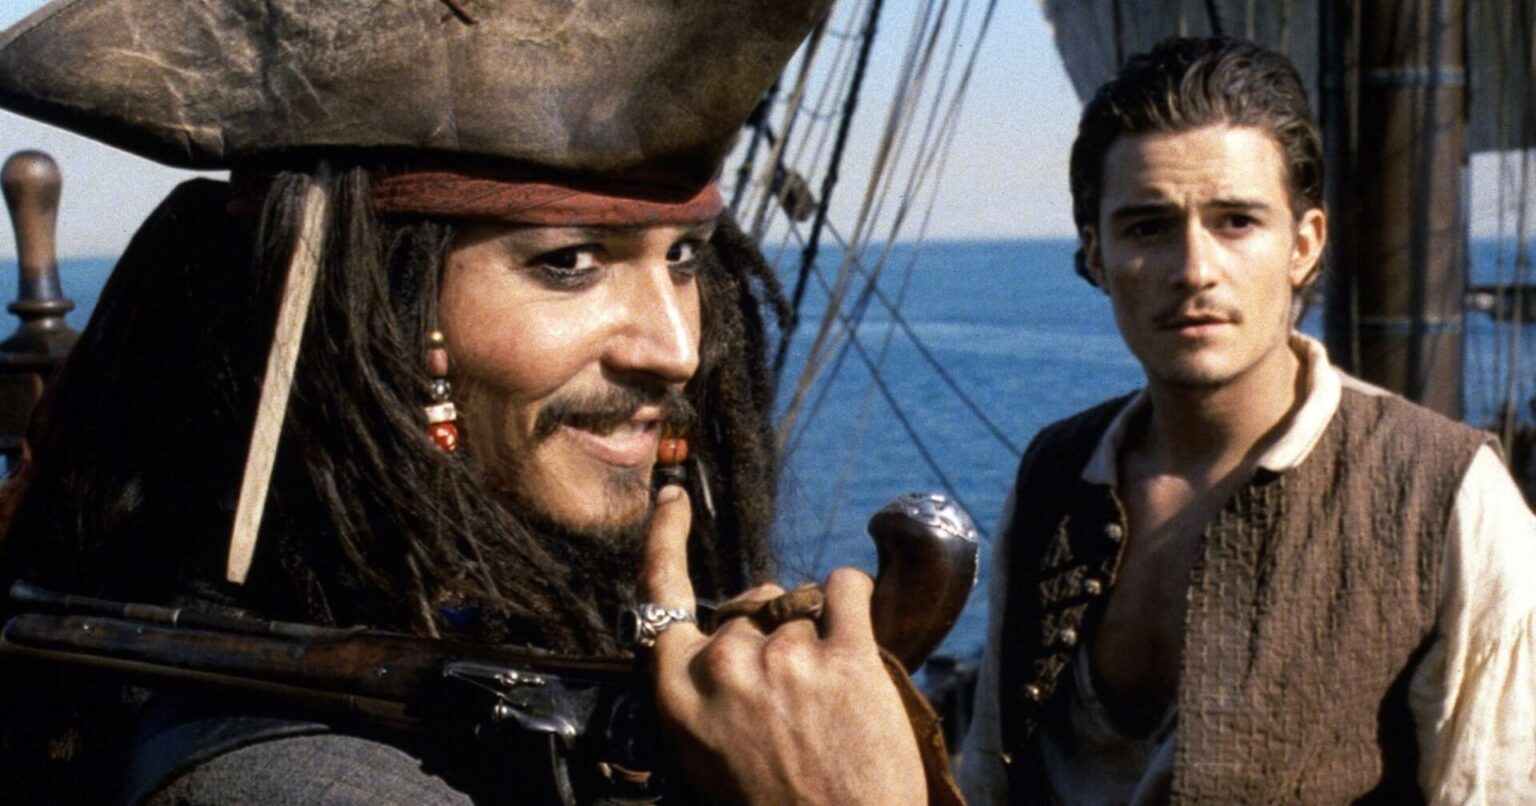 Johnny Depp stepped down from his role in 'Fantastic Beasts', but could he return to the 'Pirates of the Caribbean'? Let’s dive in.